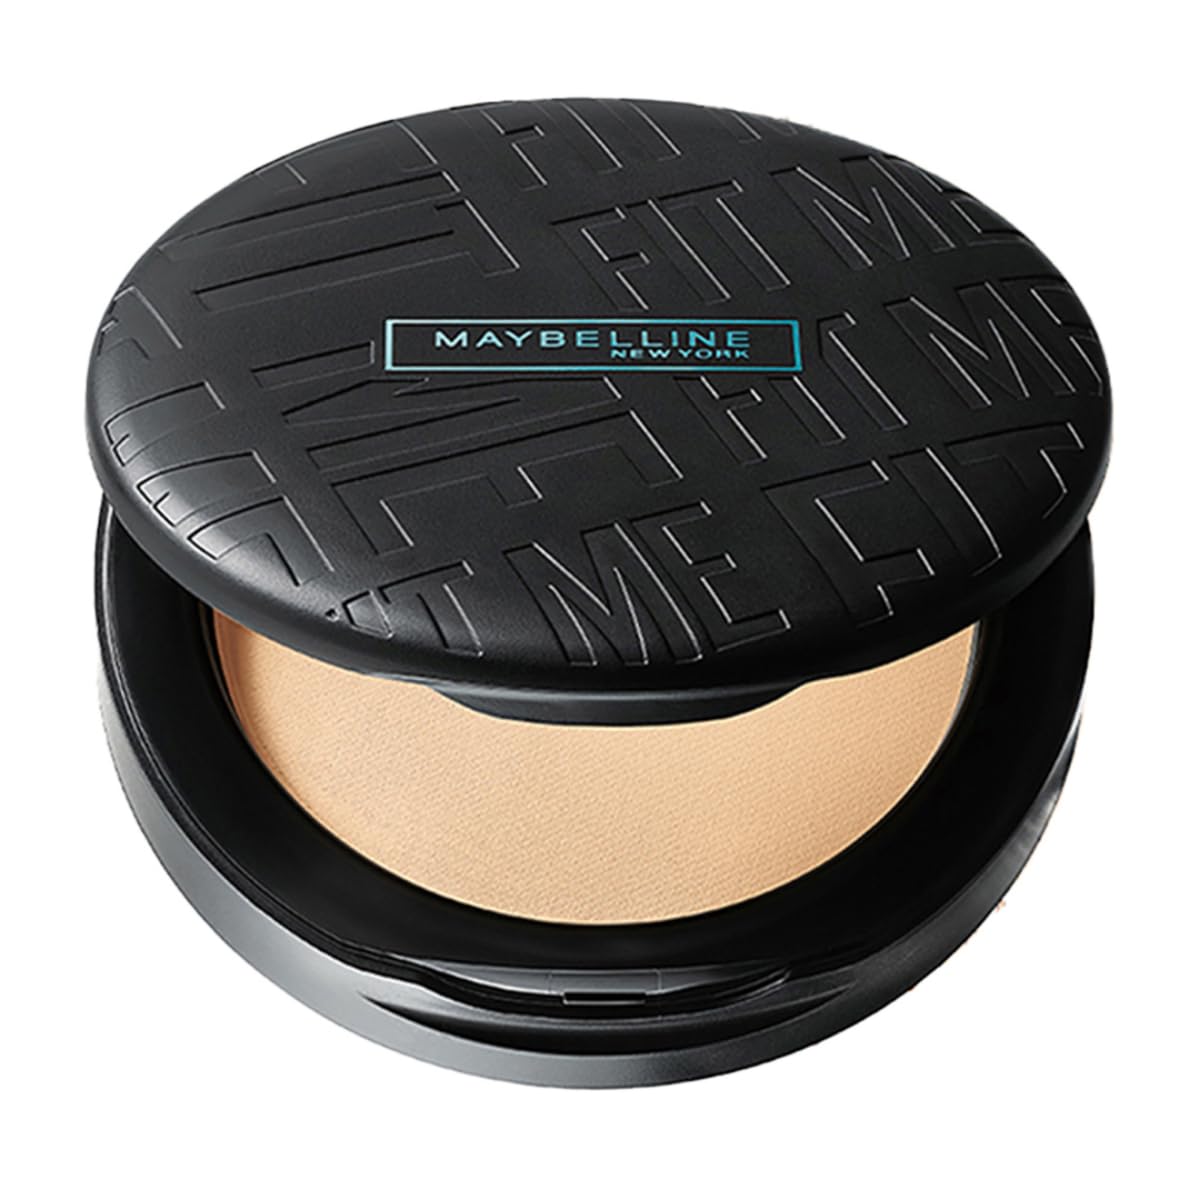 Maybelline New York Fit Me 12Hr Oil Control Compact, 128 Warm Nude - Distacart